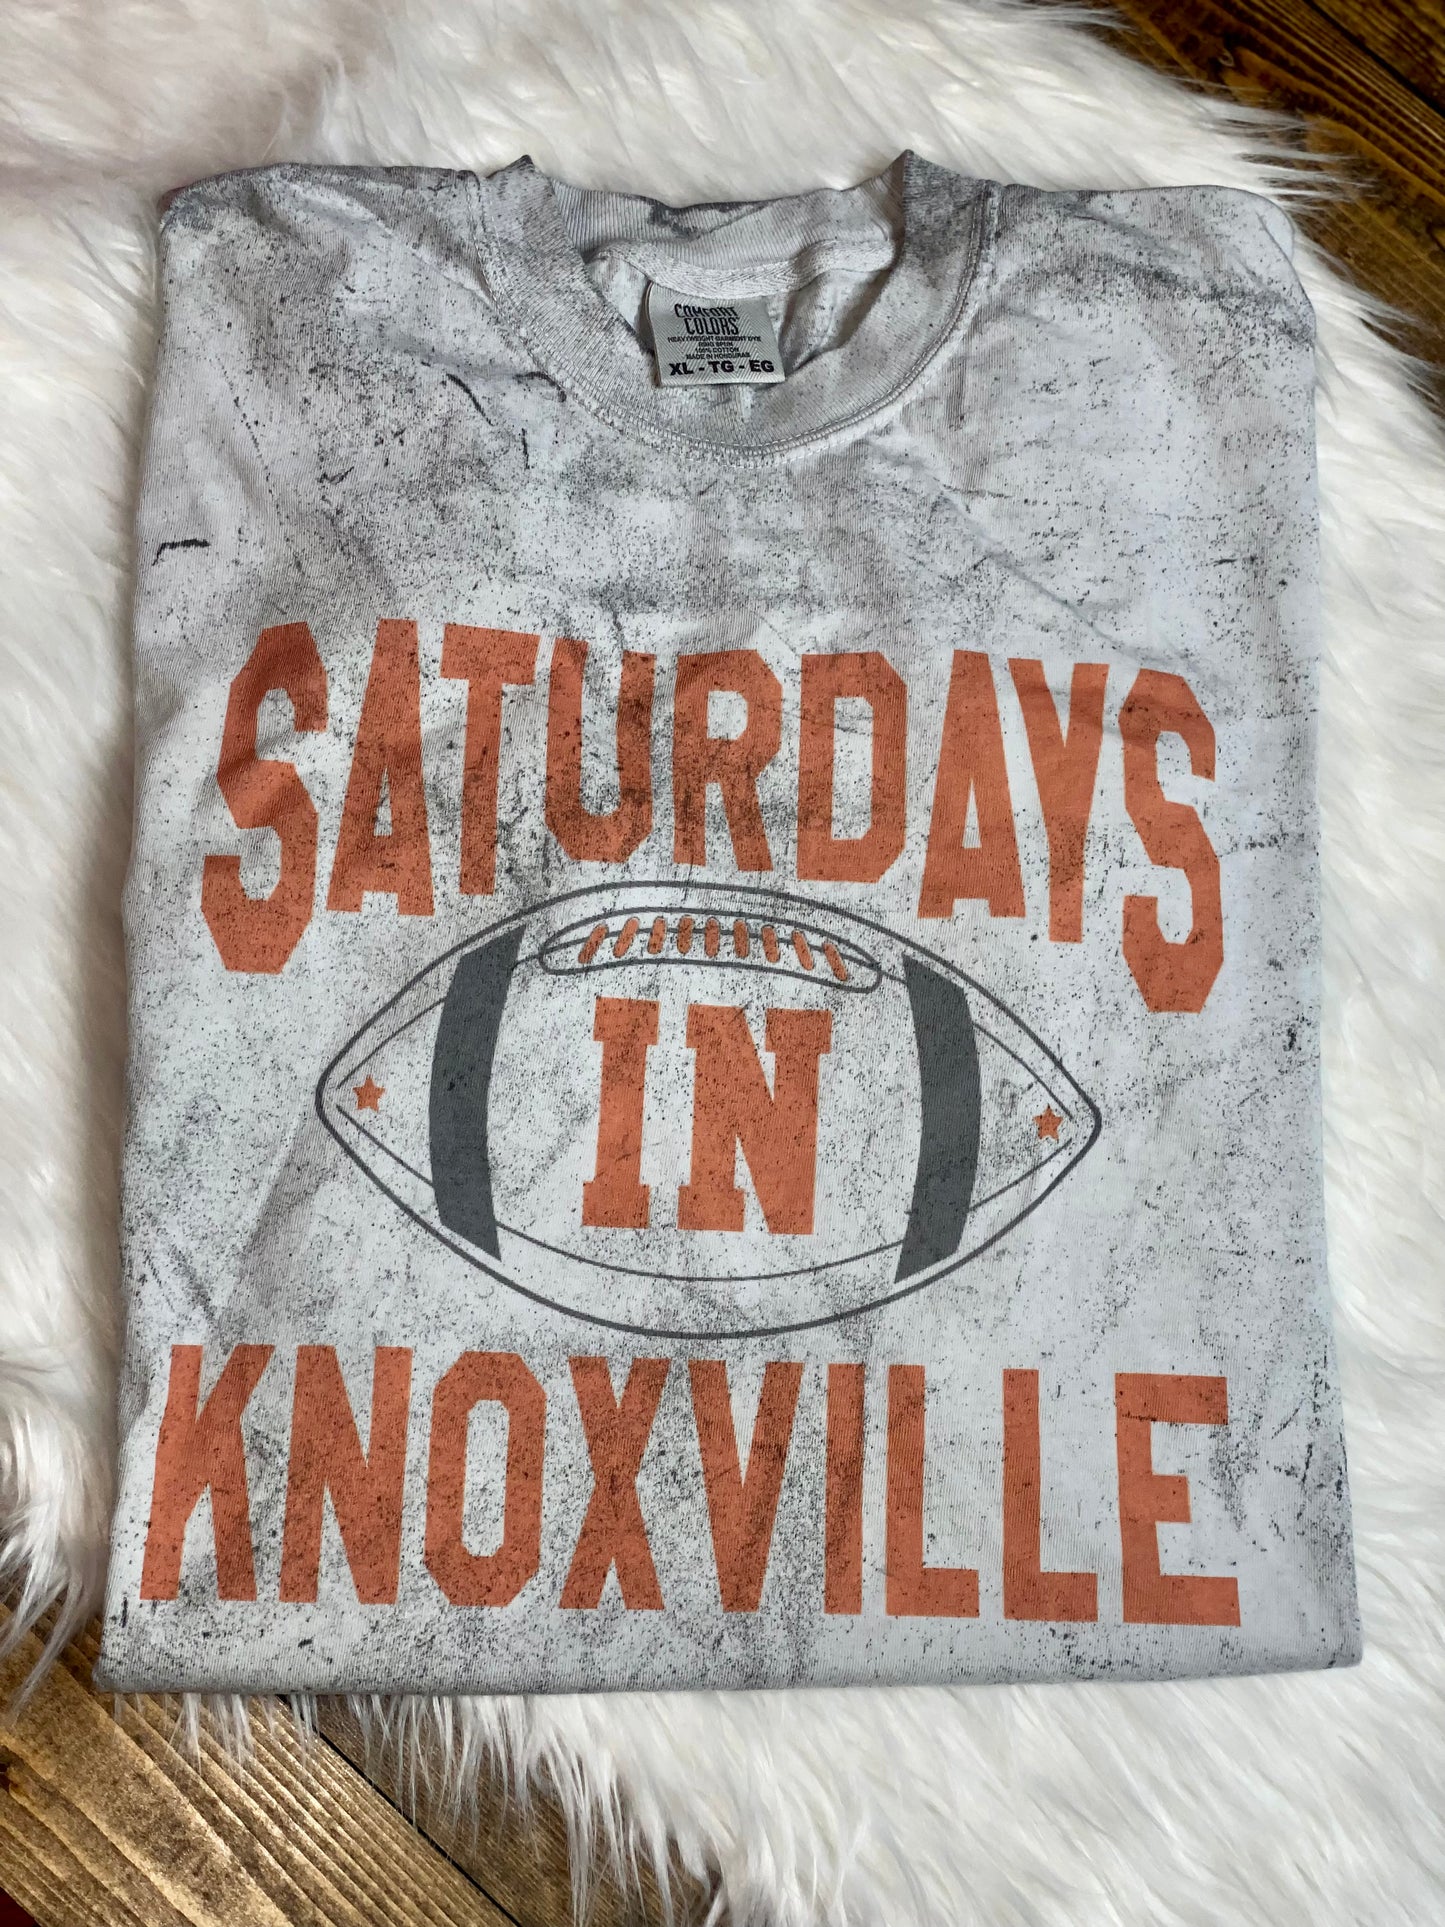 Saturdays in Knoxville